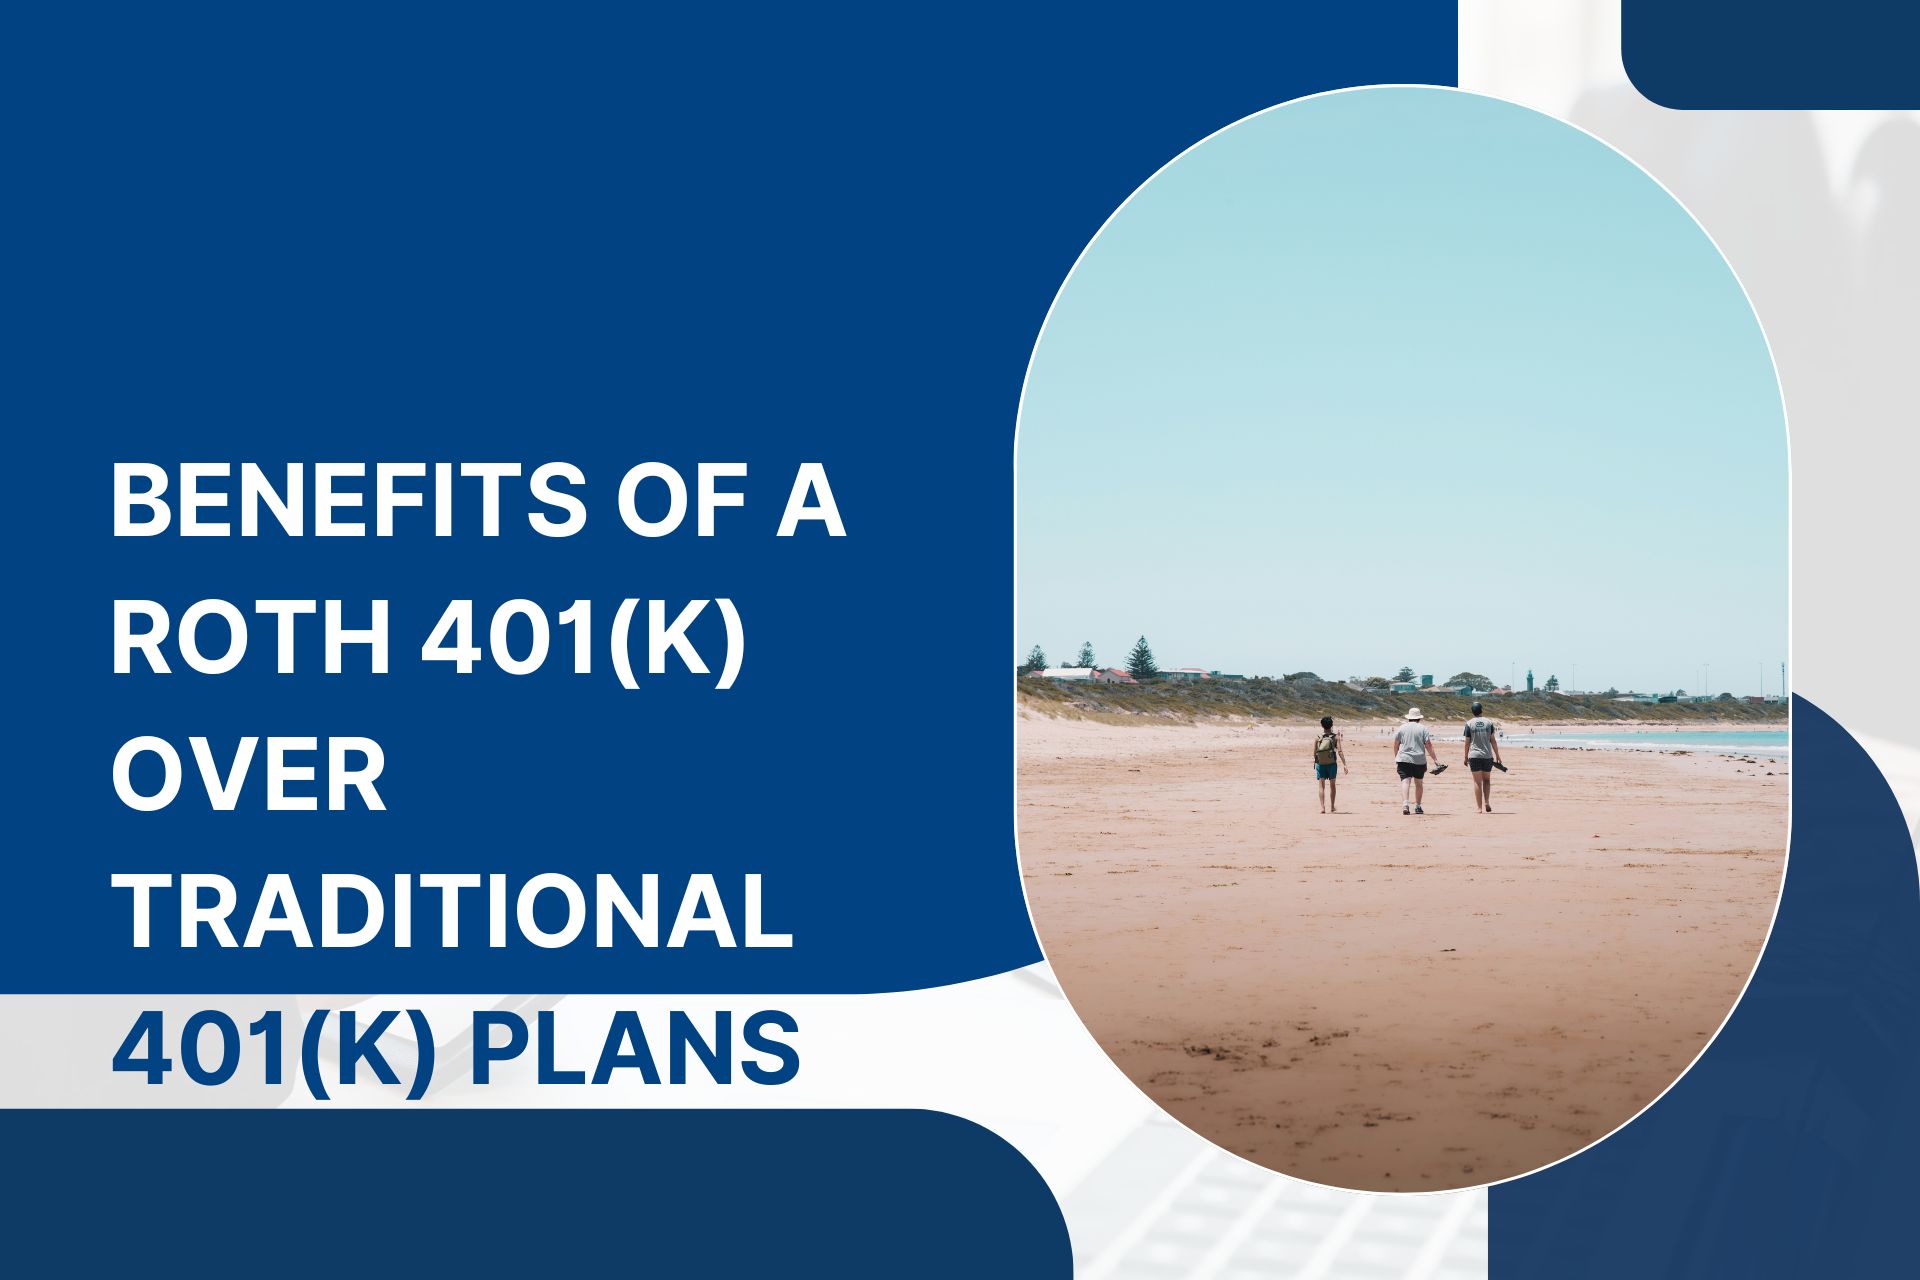 Benefits of a Roth 401(k) Over Traditional 401(k) Plans